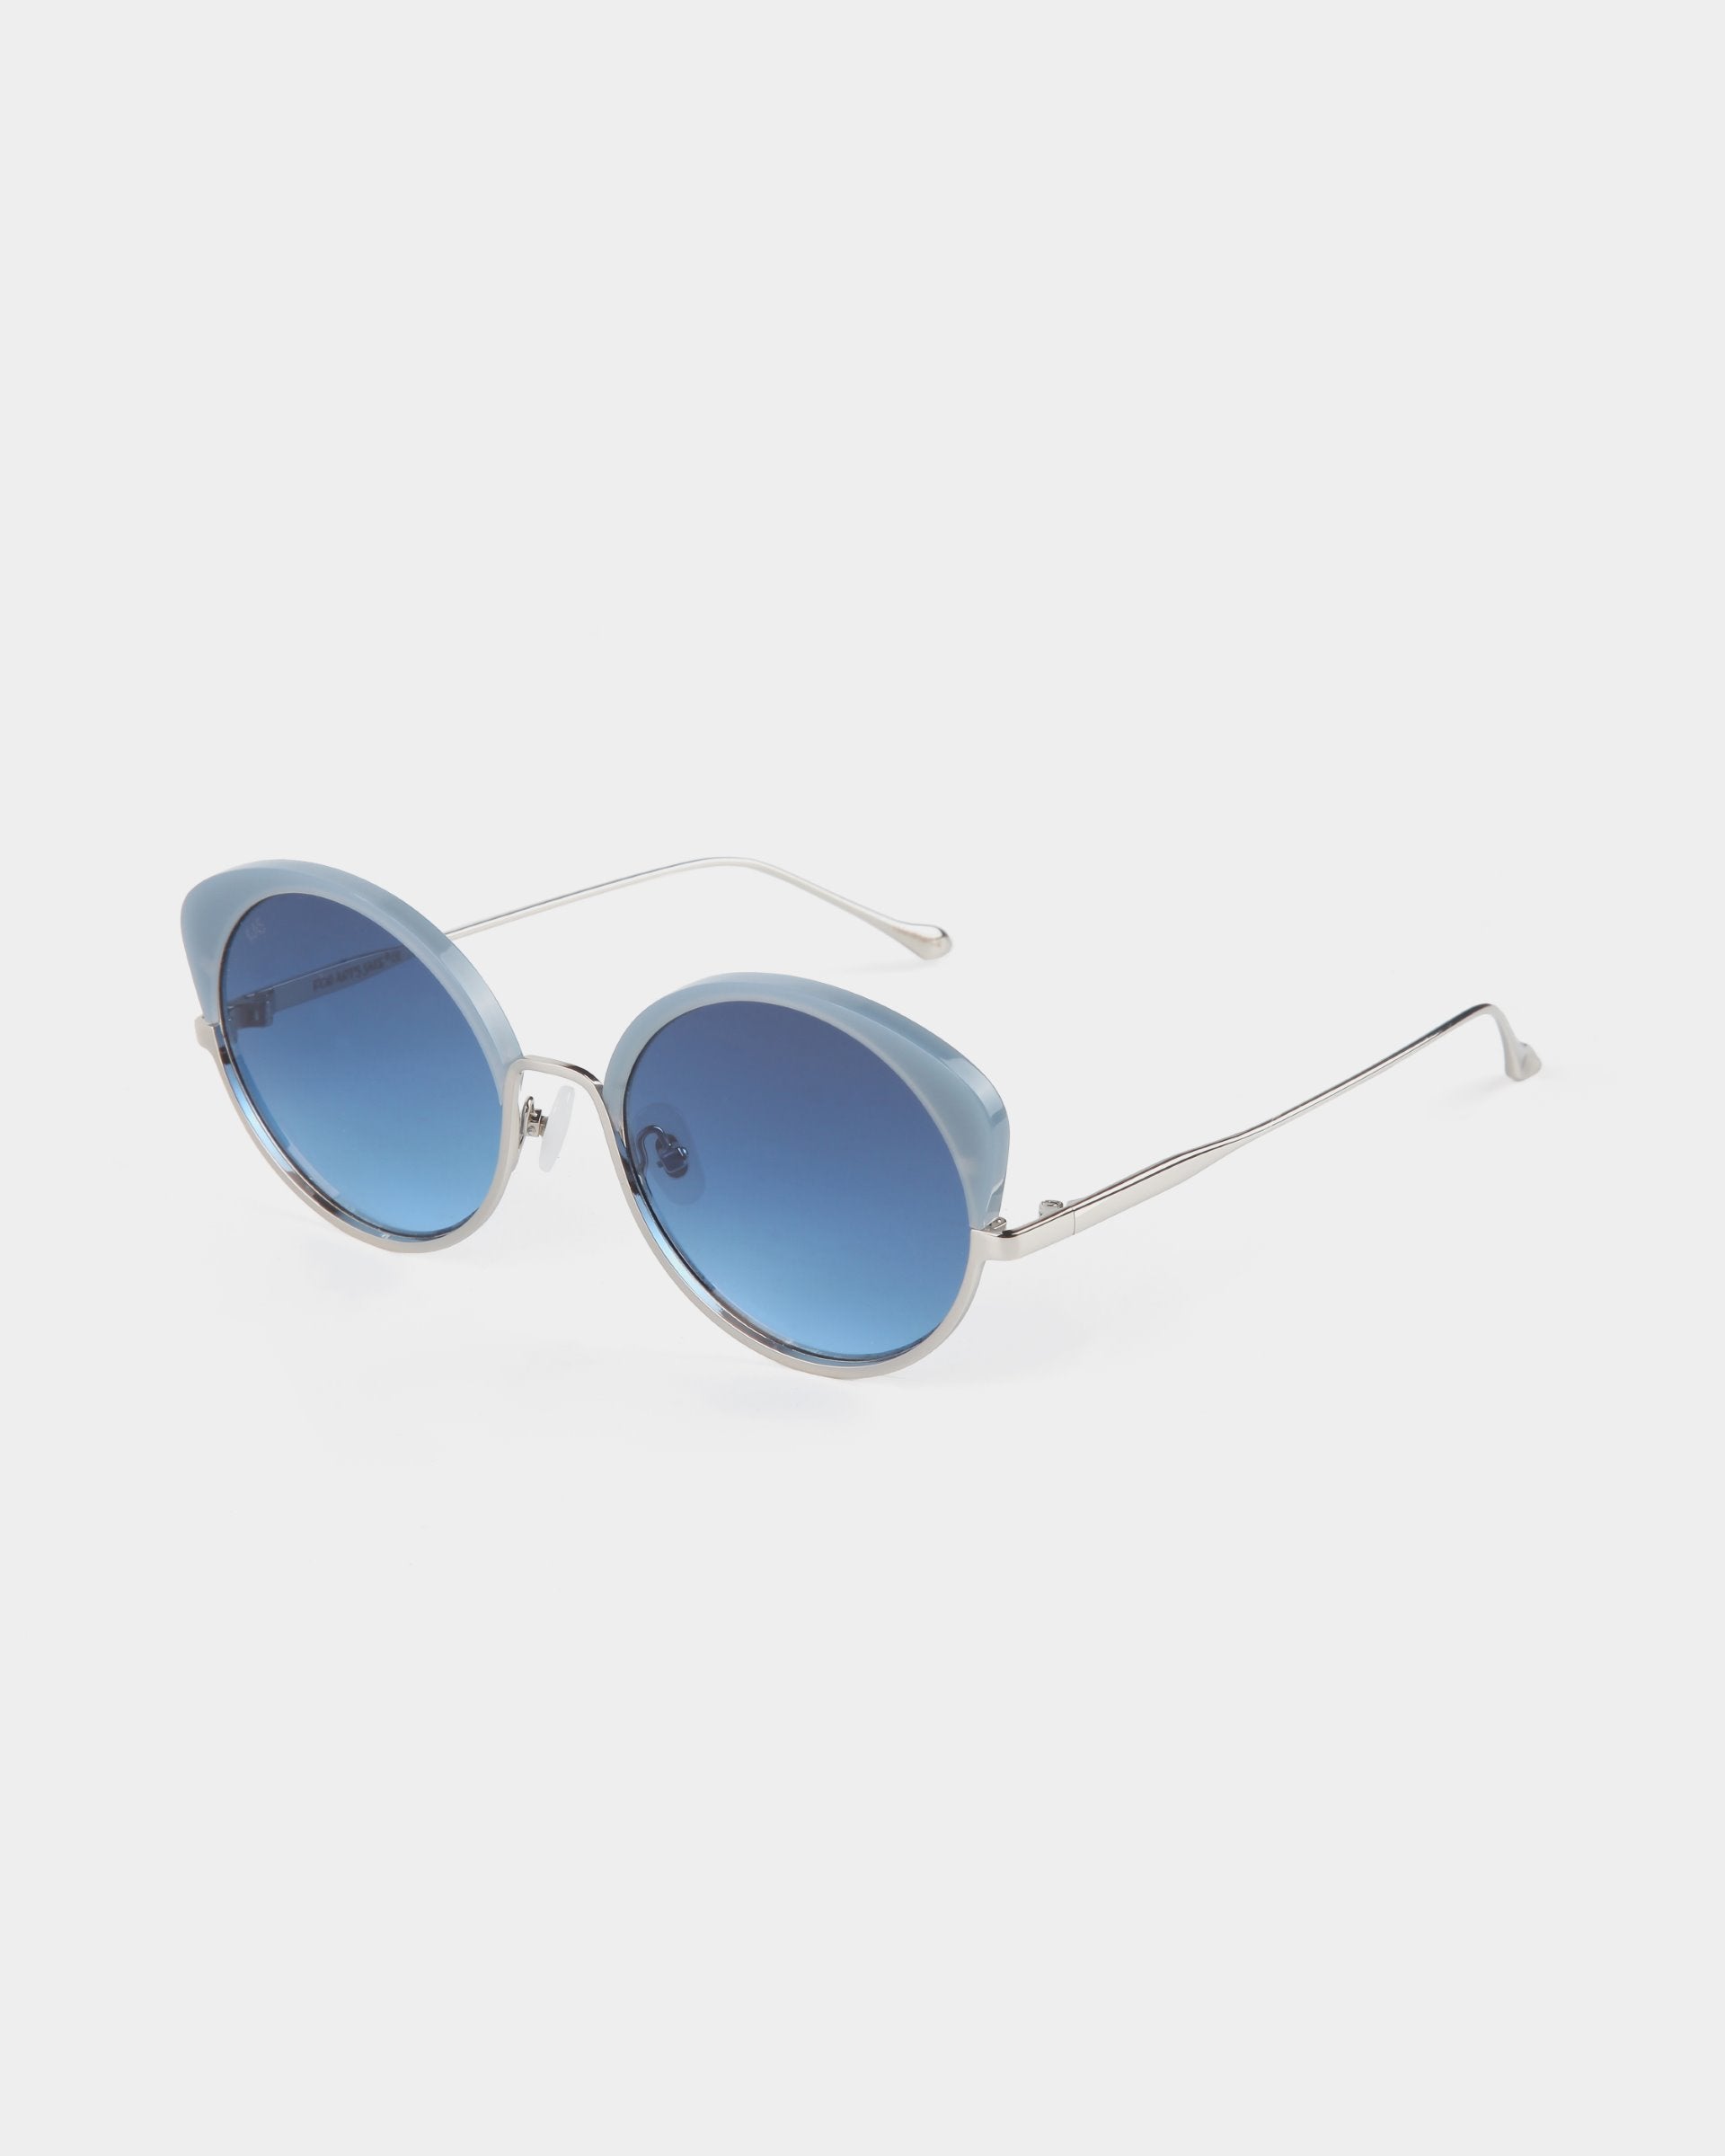 A pair of stylish Cocoon by For Art's Sake® cat-eye sunglasses with light blue, oval-shaped lenses and sleek silver frames. The arms are thin and slightly curved, featuring a minimal design. These handcrafted eyewear pieces offer UV protection and are positioned at an angle against a plain white background.